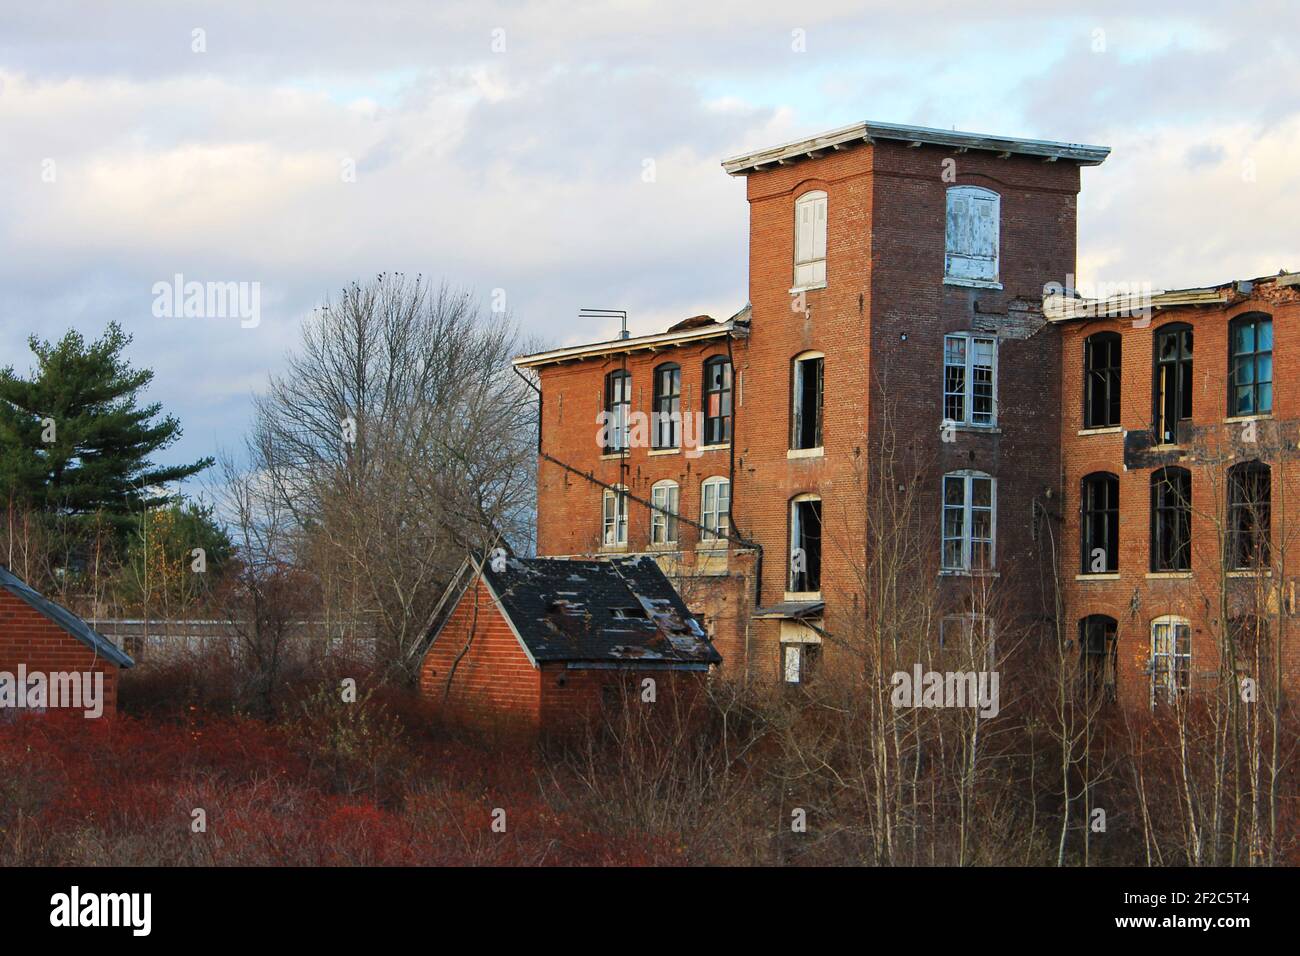 An old, abandoned, brick building that is falling into ruin, with broken windows and overgrown yard. Stock Photo